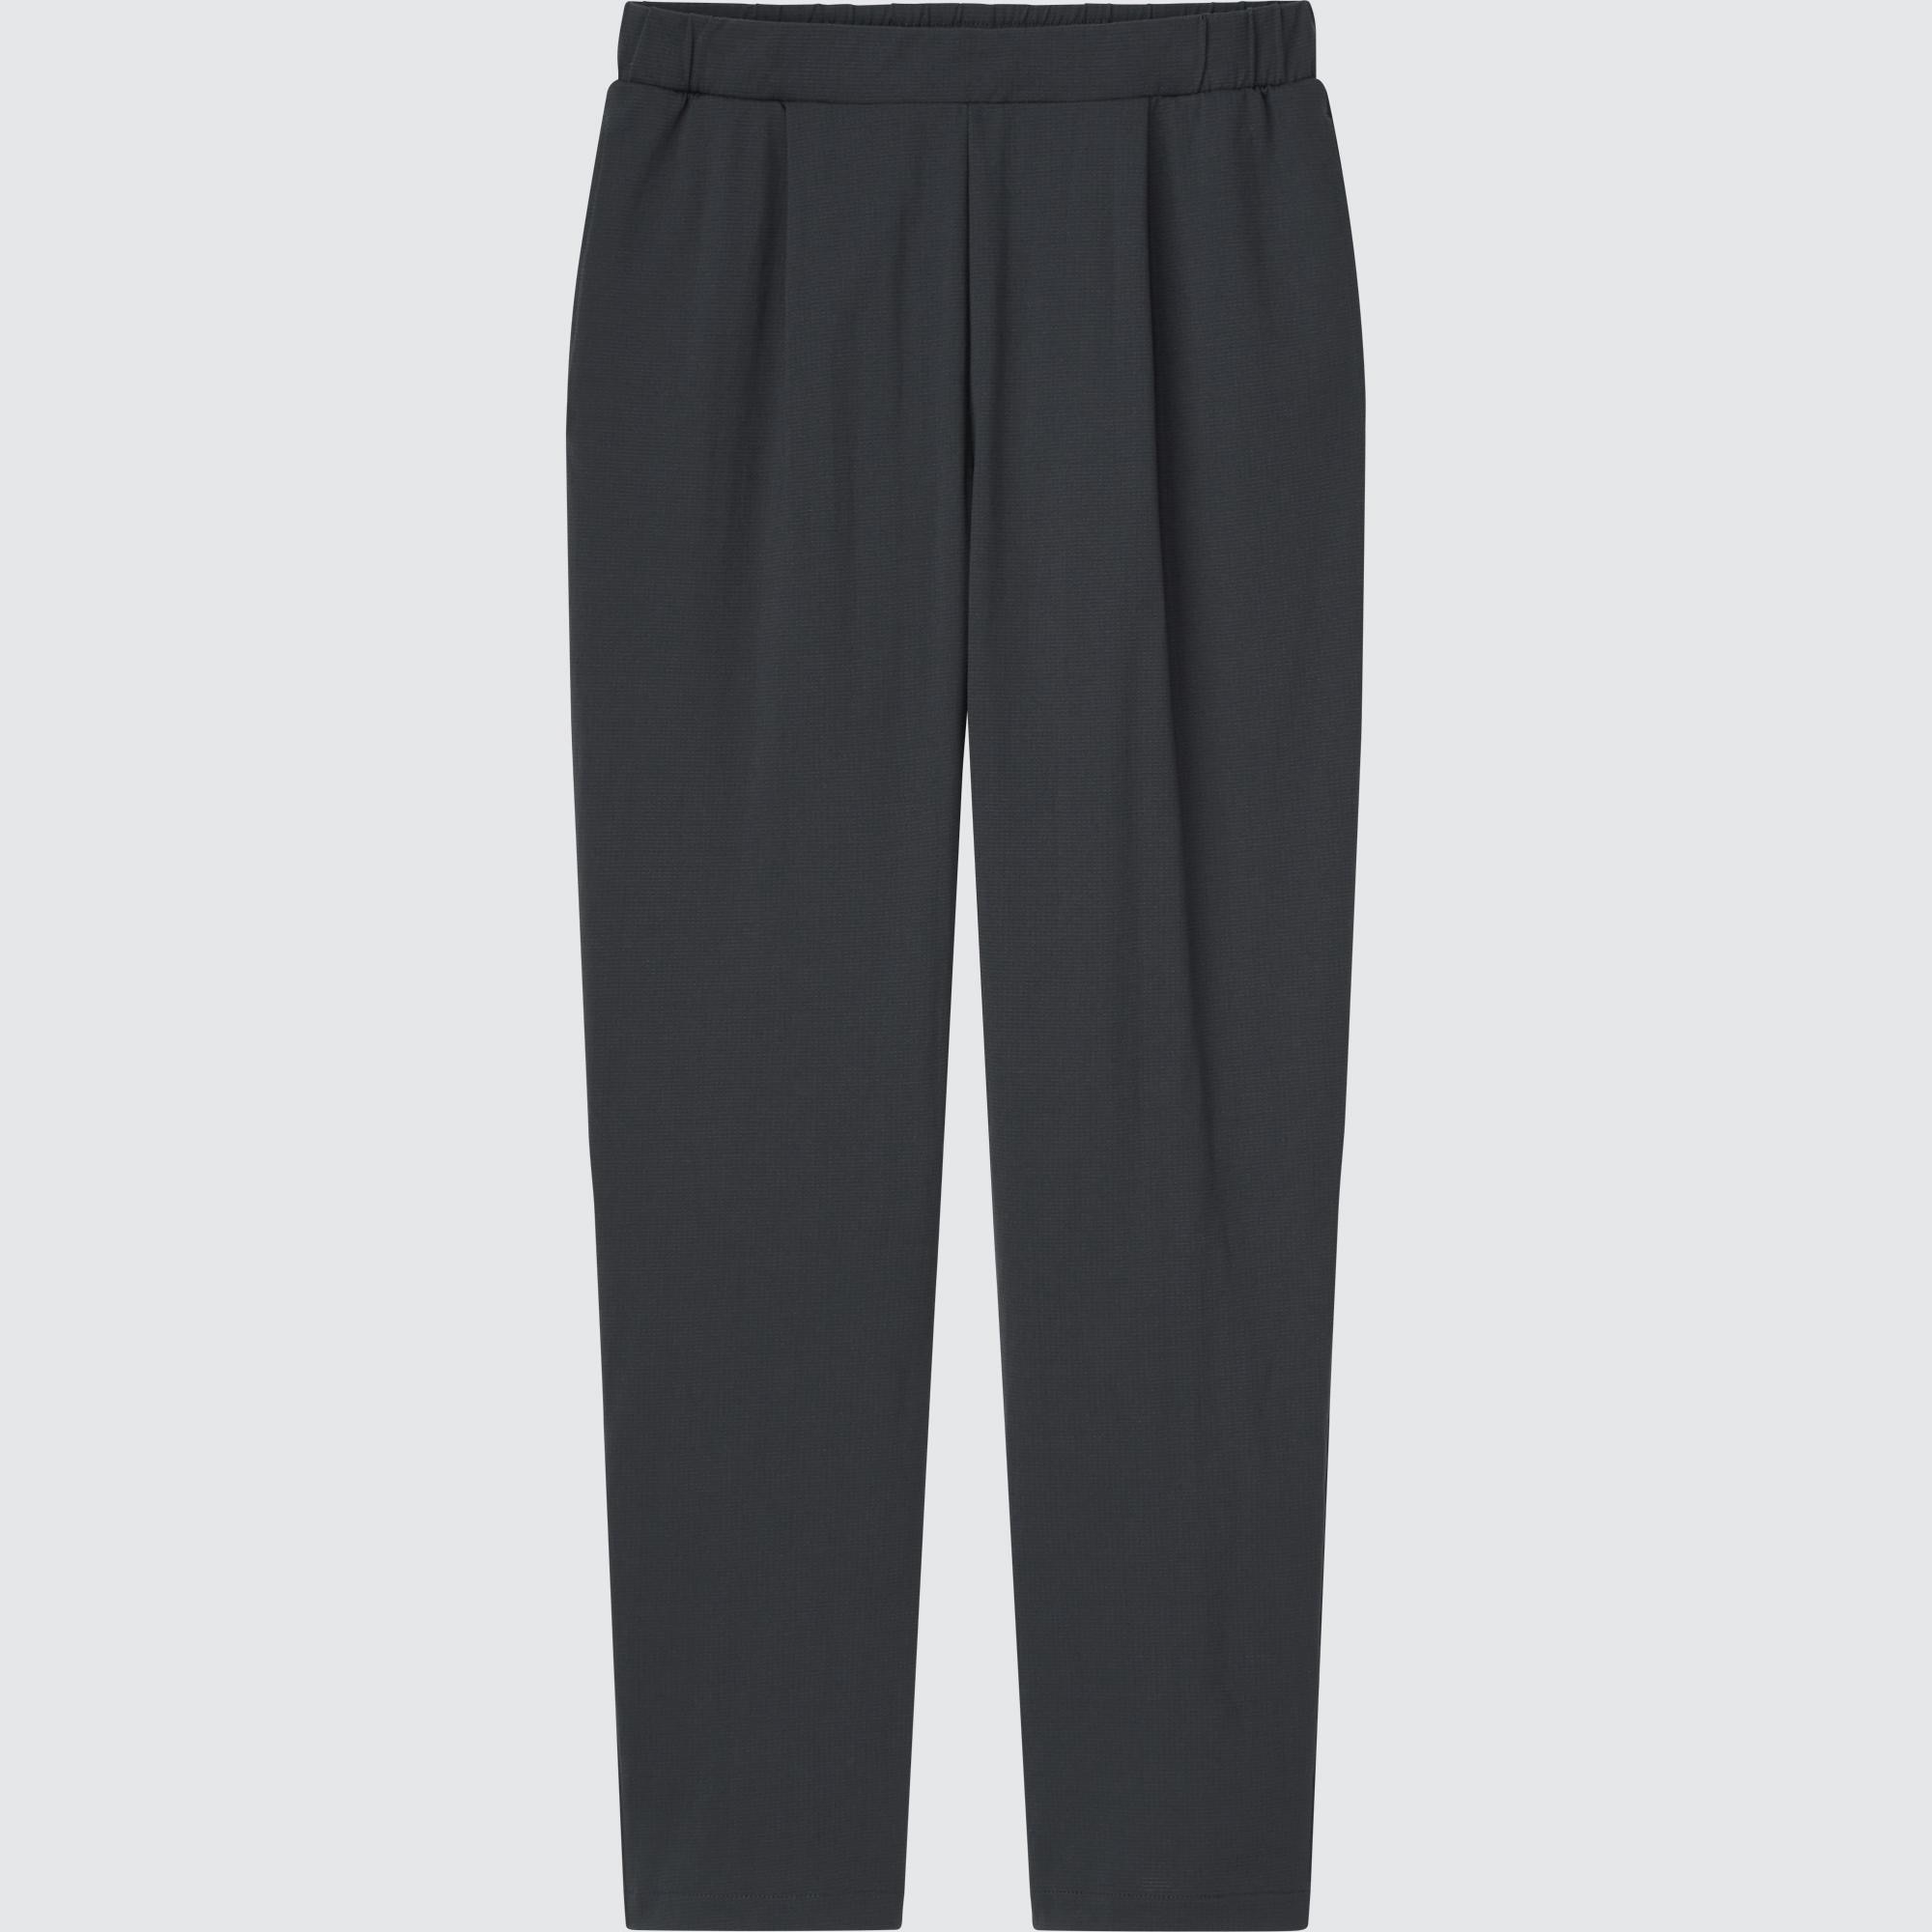 UNIQLO WOMEN ULTRA STRETCH ACTIVE JOGGER PANTS FOR WOMEN (8.44